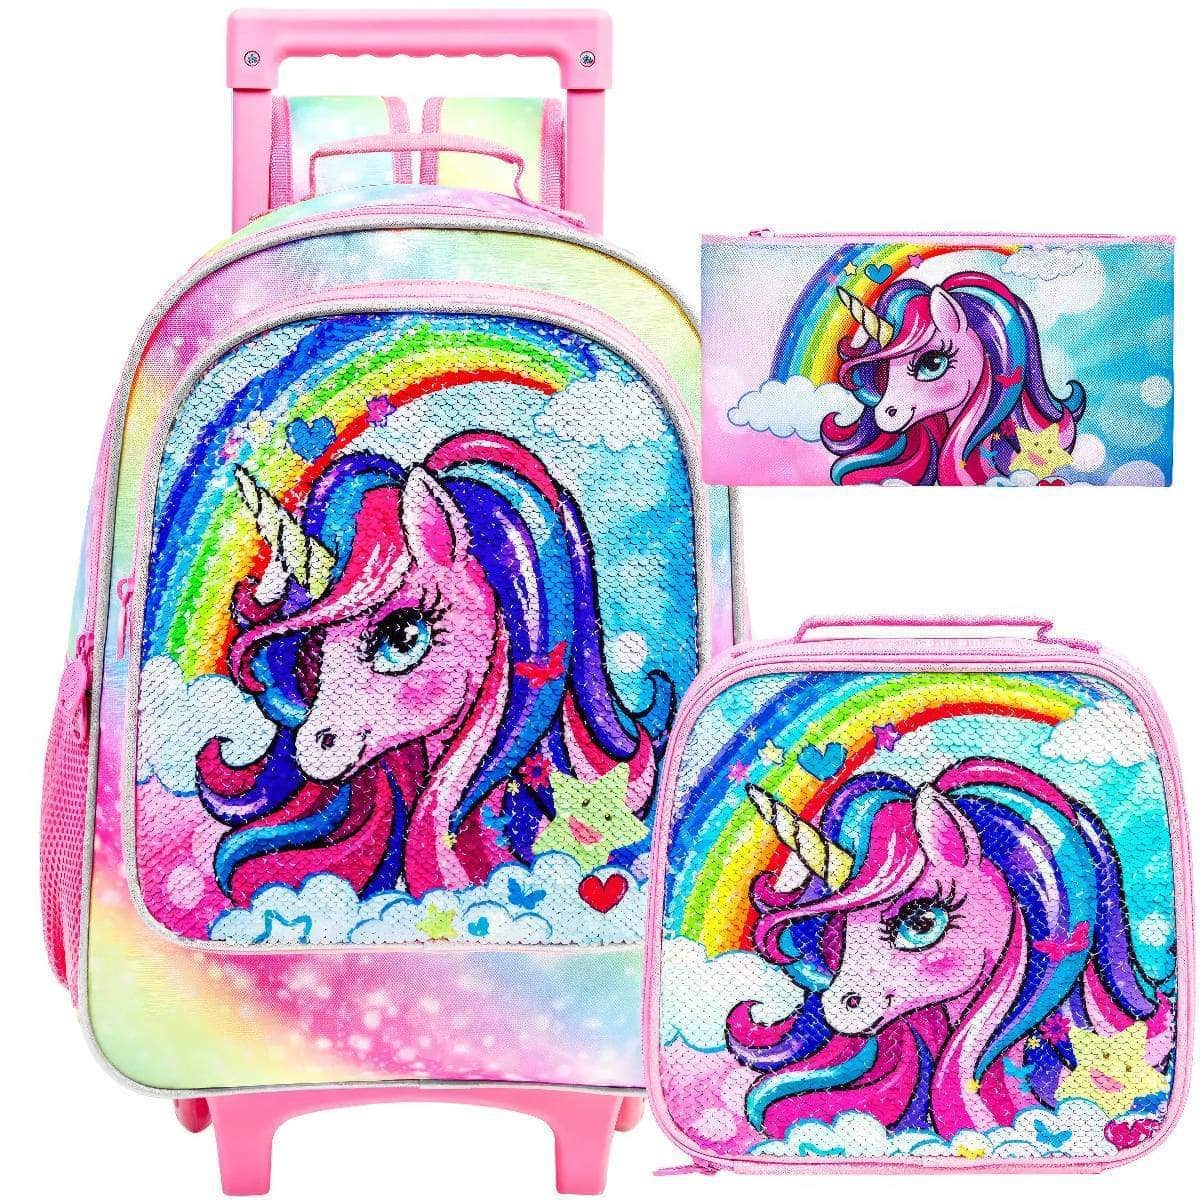 Girls' 3PCS Rolling Backpack Set - Unicorn Design with Glow-in-the-dark Function, Roller Wheels, and Lunch Bag Rolling-Uni-Rainbow